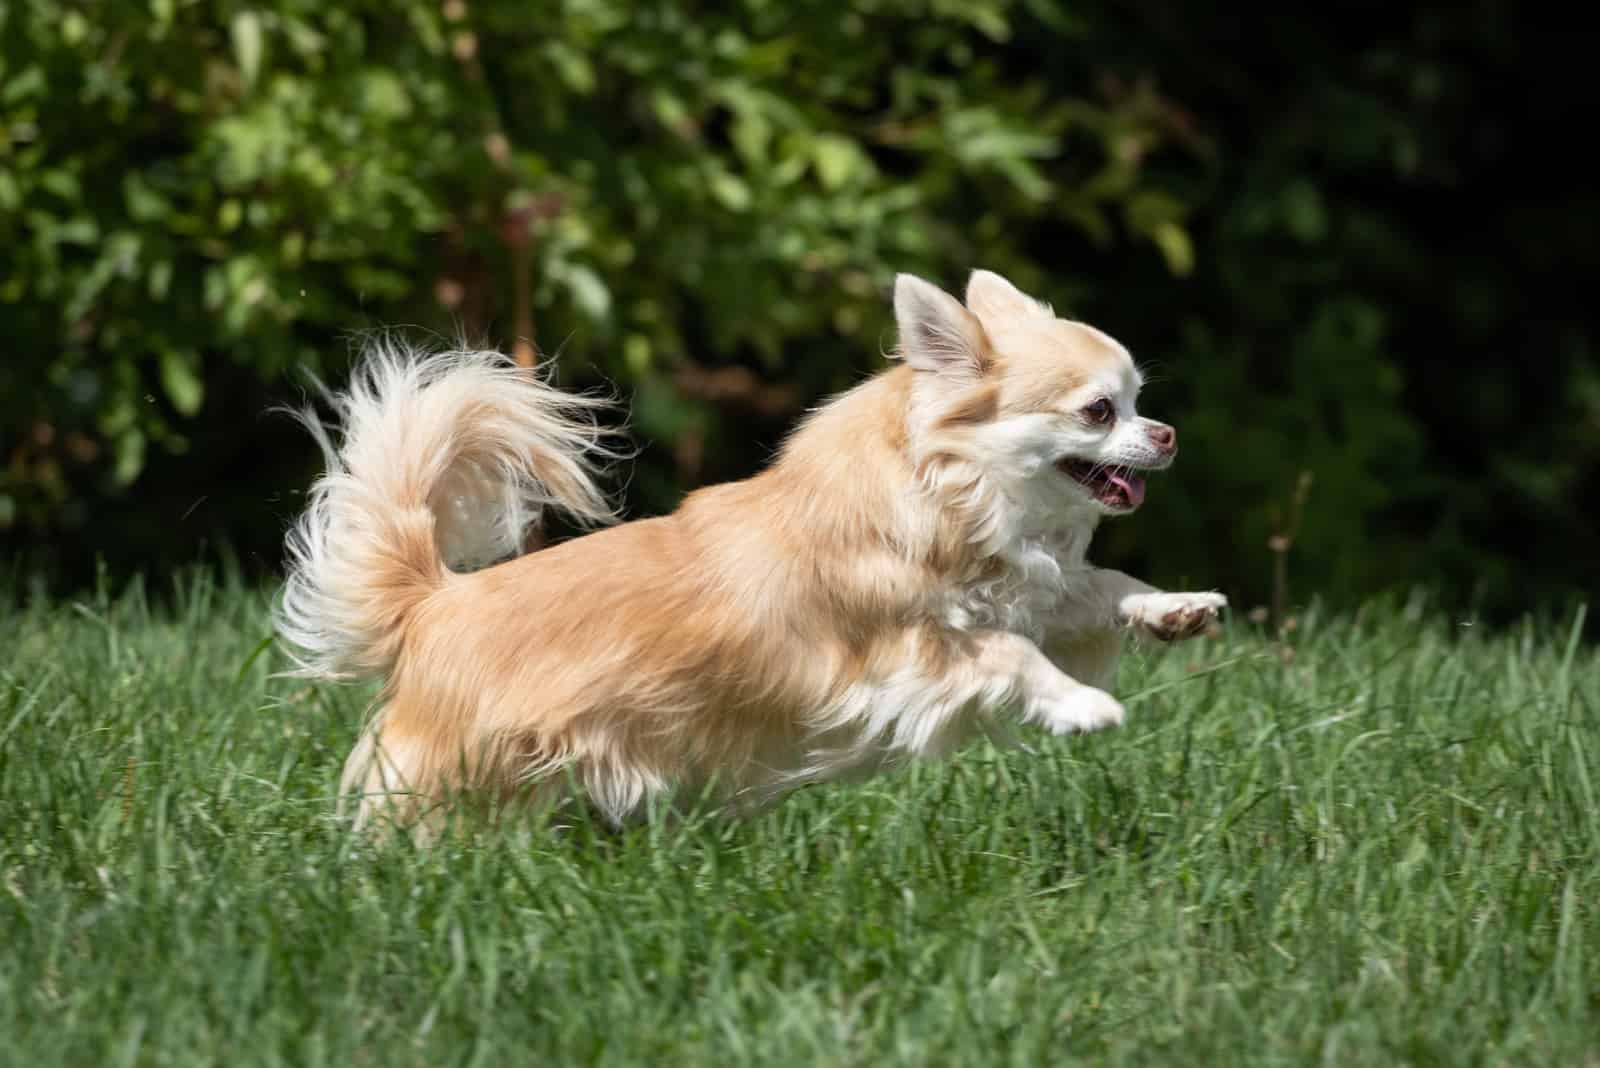 Long haired chihuahua playing